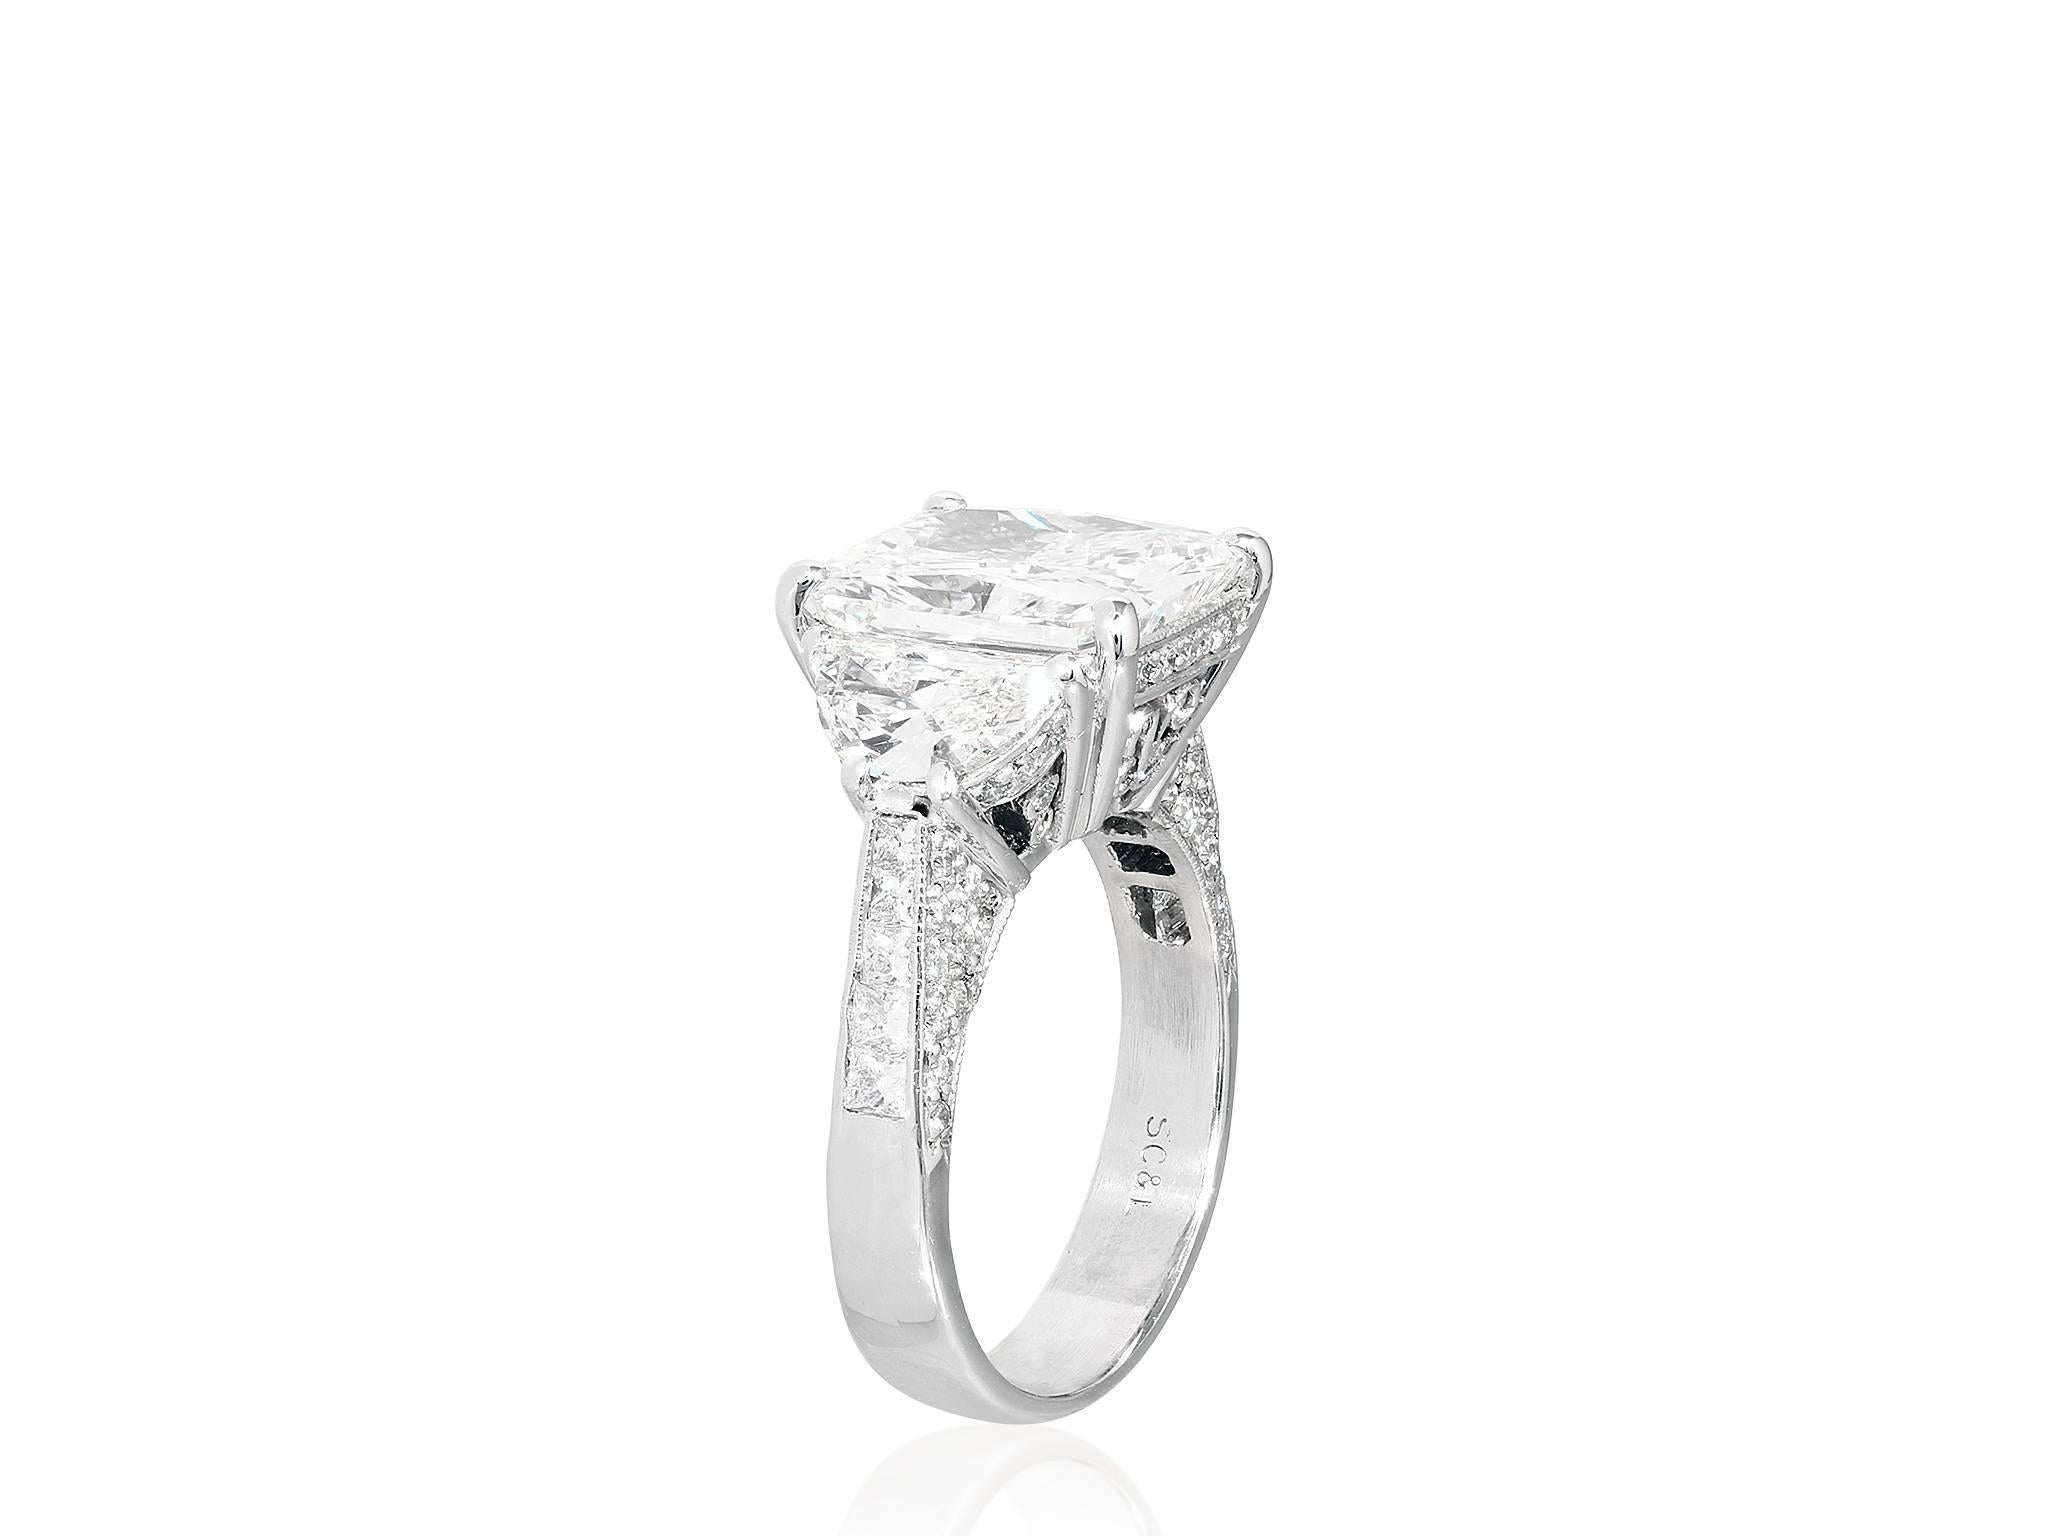 Platinum ring consisting of radiant cut diamond weighing 5.07 carats, having a color and clarity of I/VS2 with GIA certificate, the center stone is flanked by 2 brilliant cut half moon diamonds having a total weight of approximately